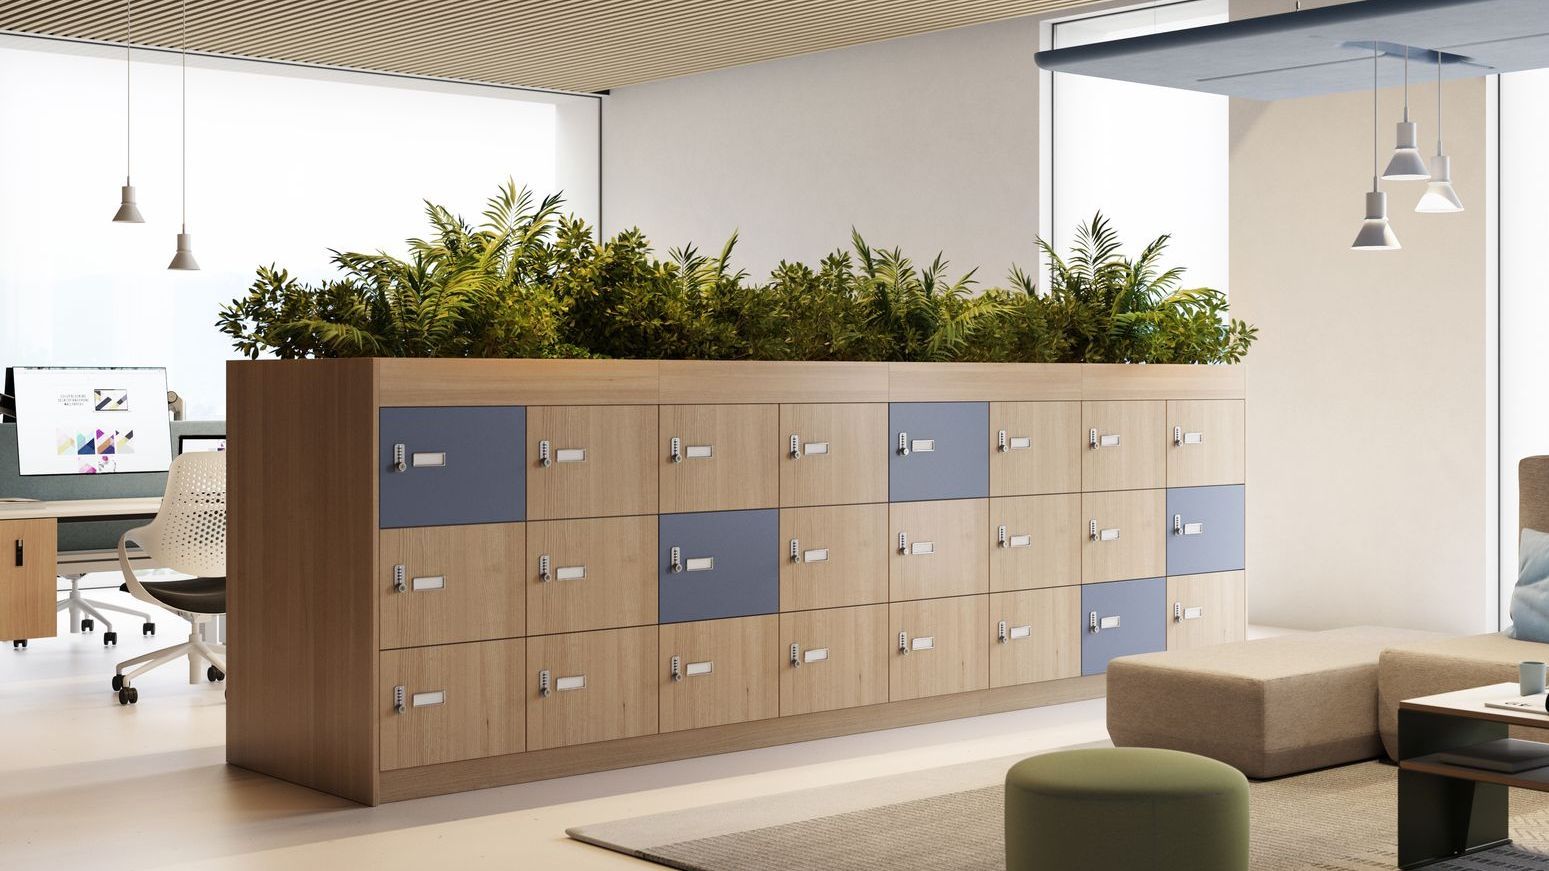 Locker wall unit in wood with 20 wooden locks & four gray lockers. On top of the unit is thriving greenery. The unit is in a tidy office. 